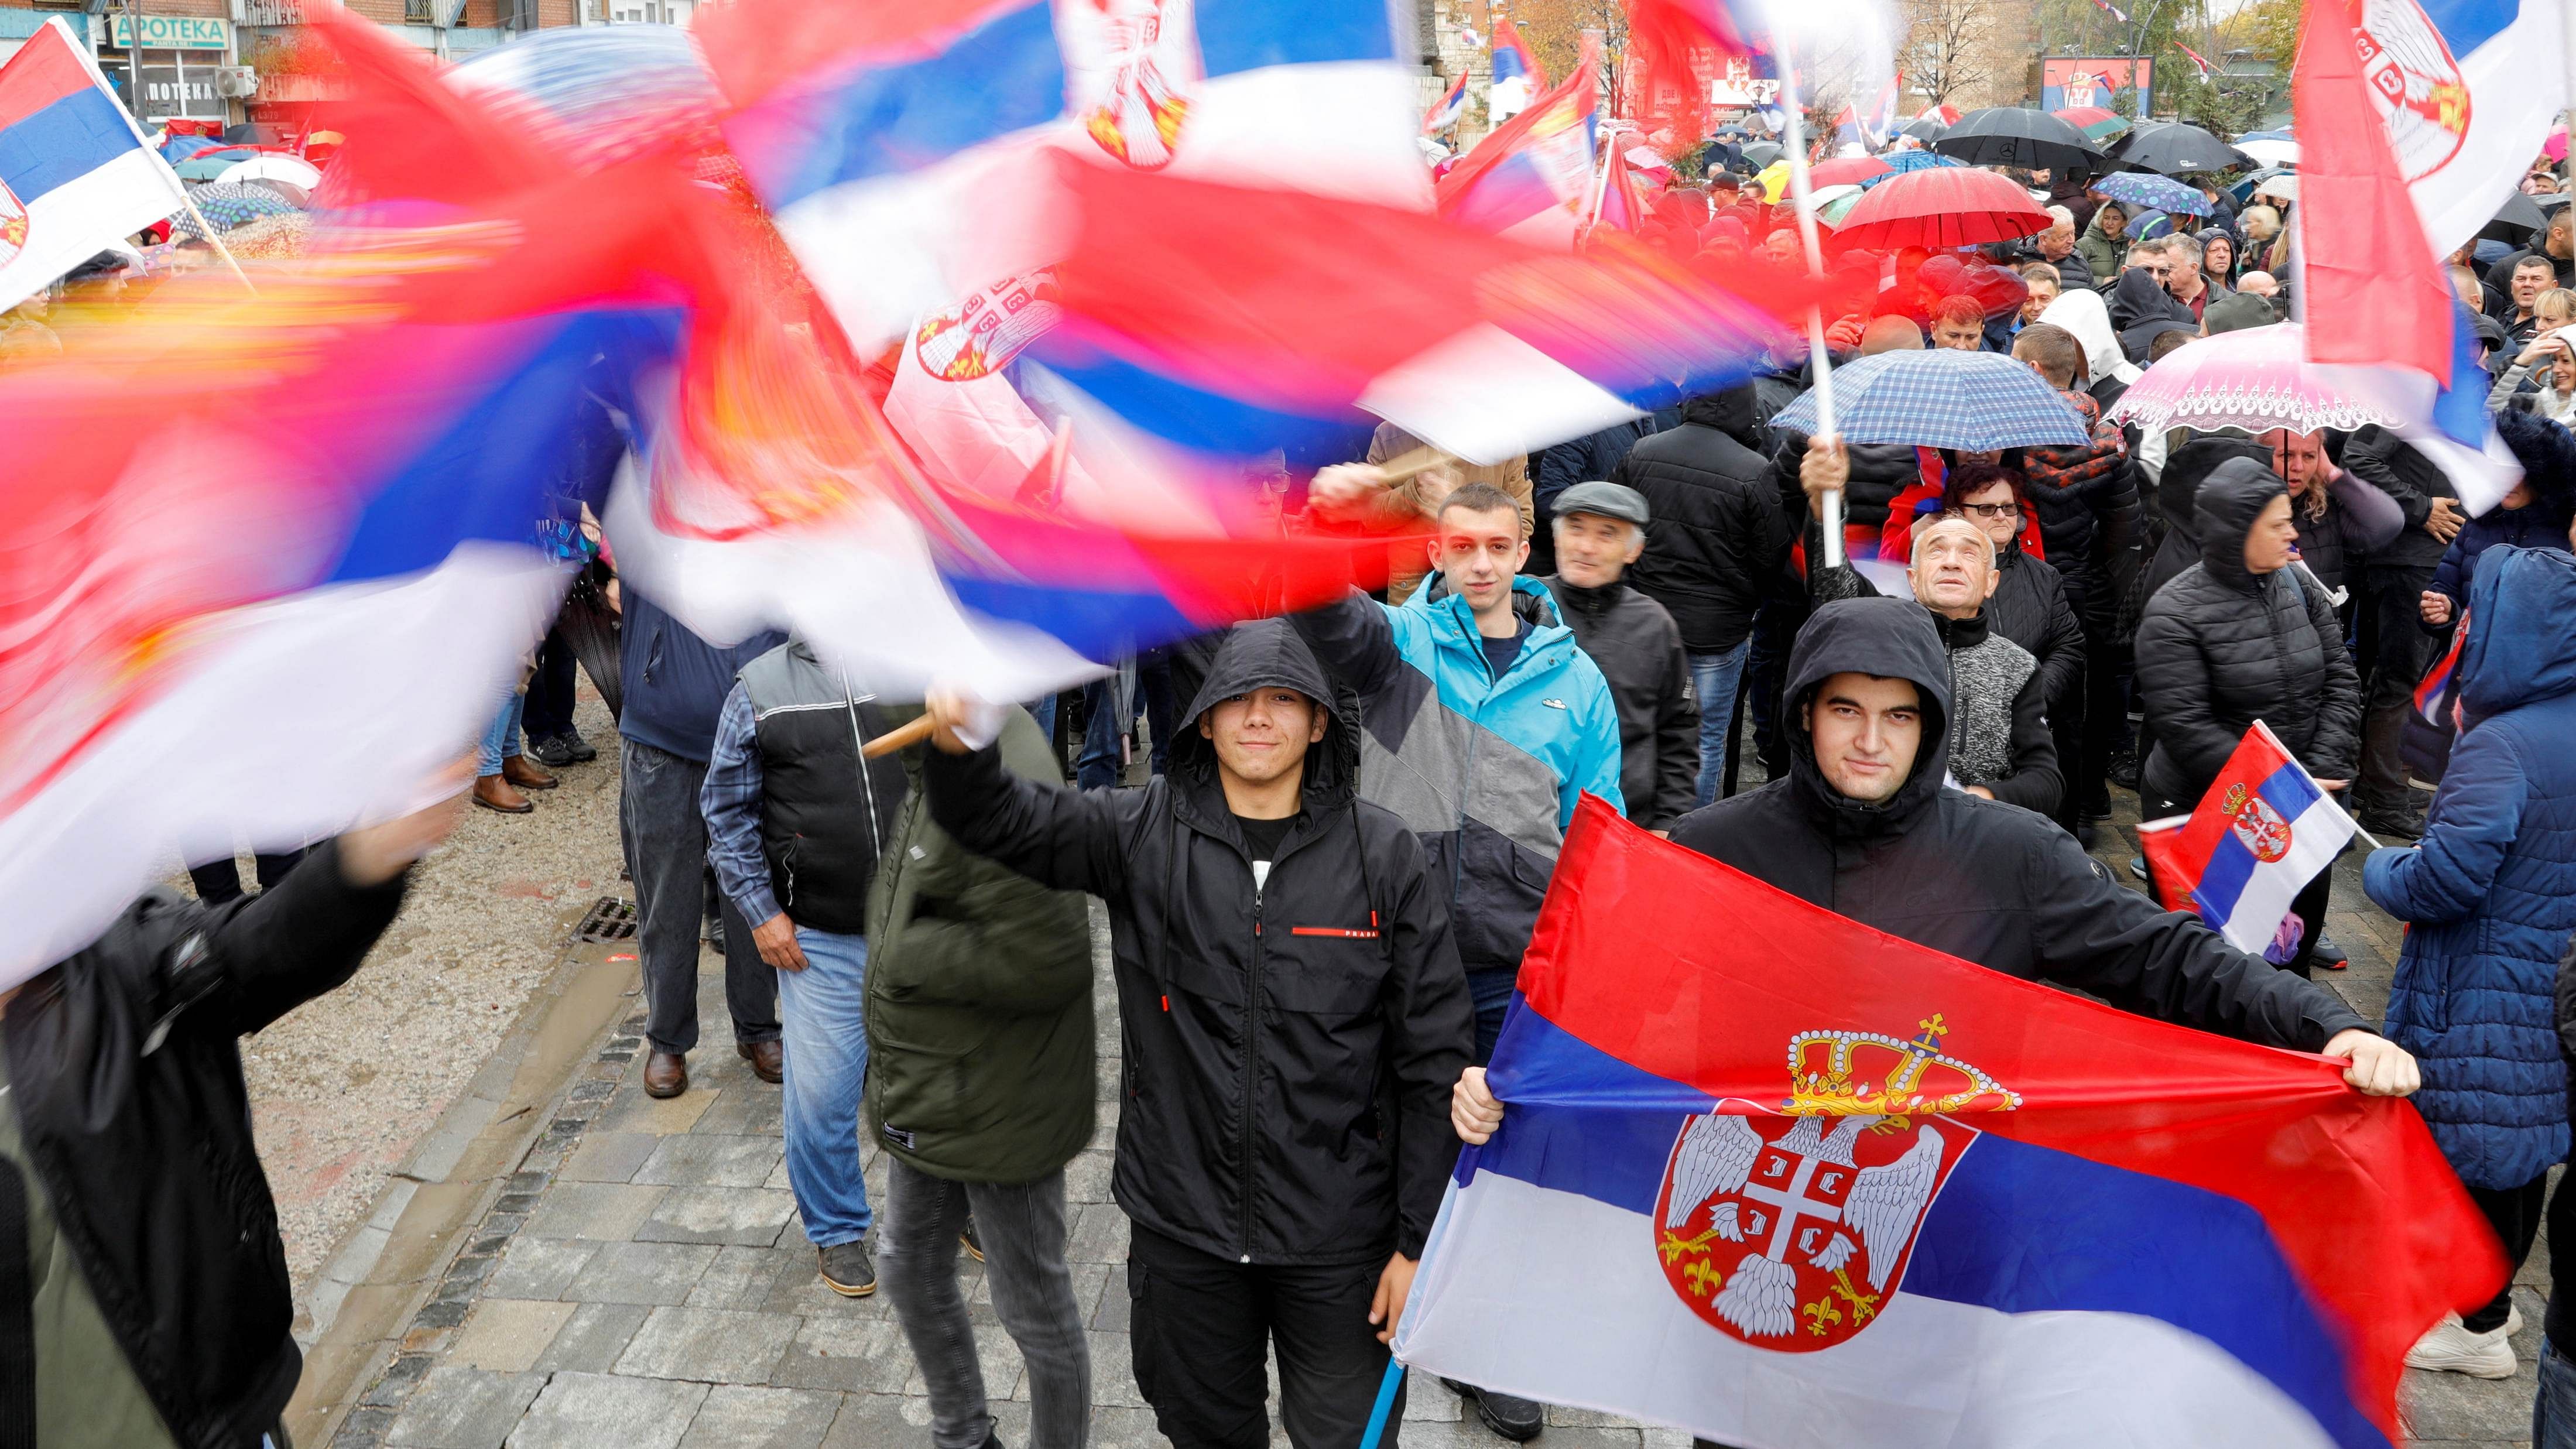 People wave Serbian flags as they protest following local Serbs' decision to leave Kosovo institutions. Credit: Reuters Photo